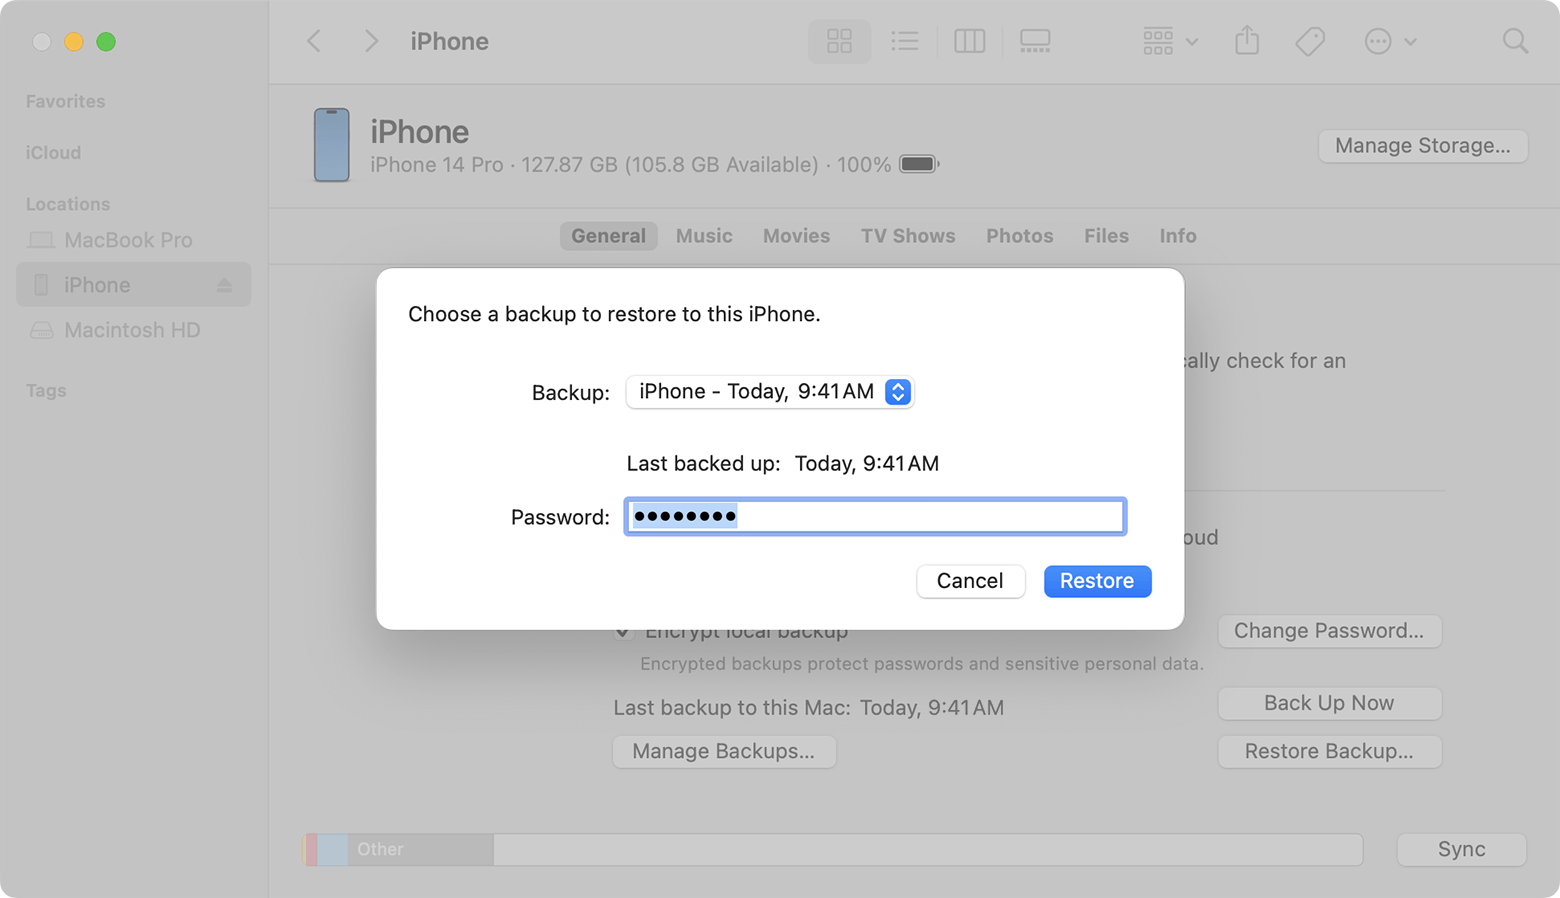 A Finder window showing a prompt to choose a backup and enter your password